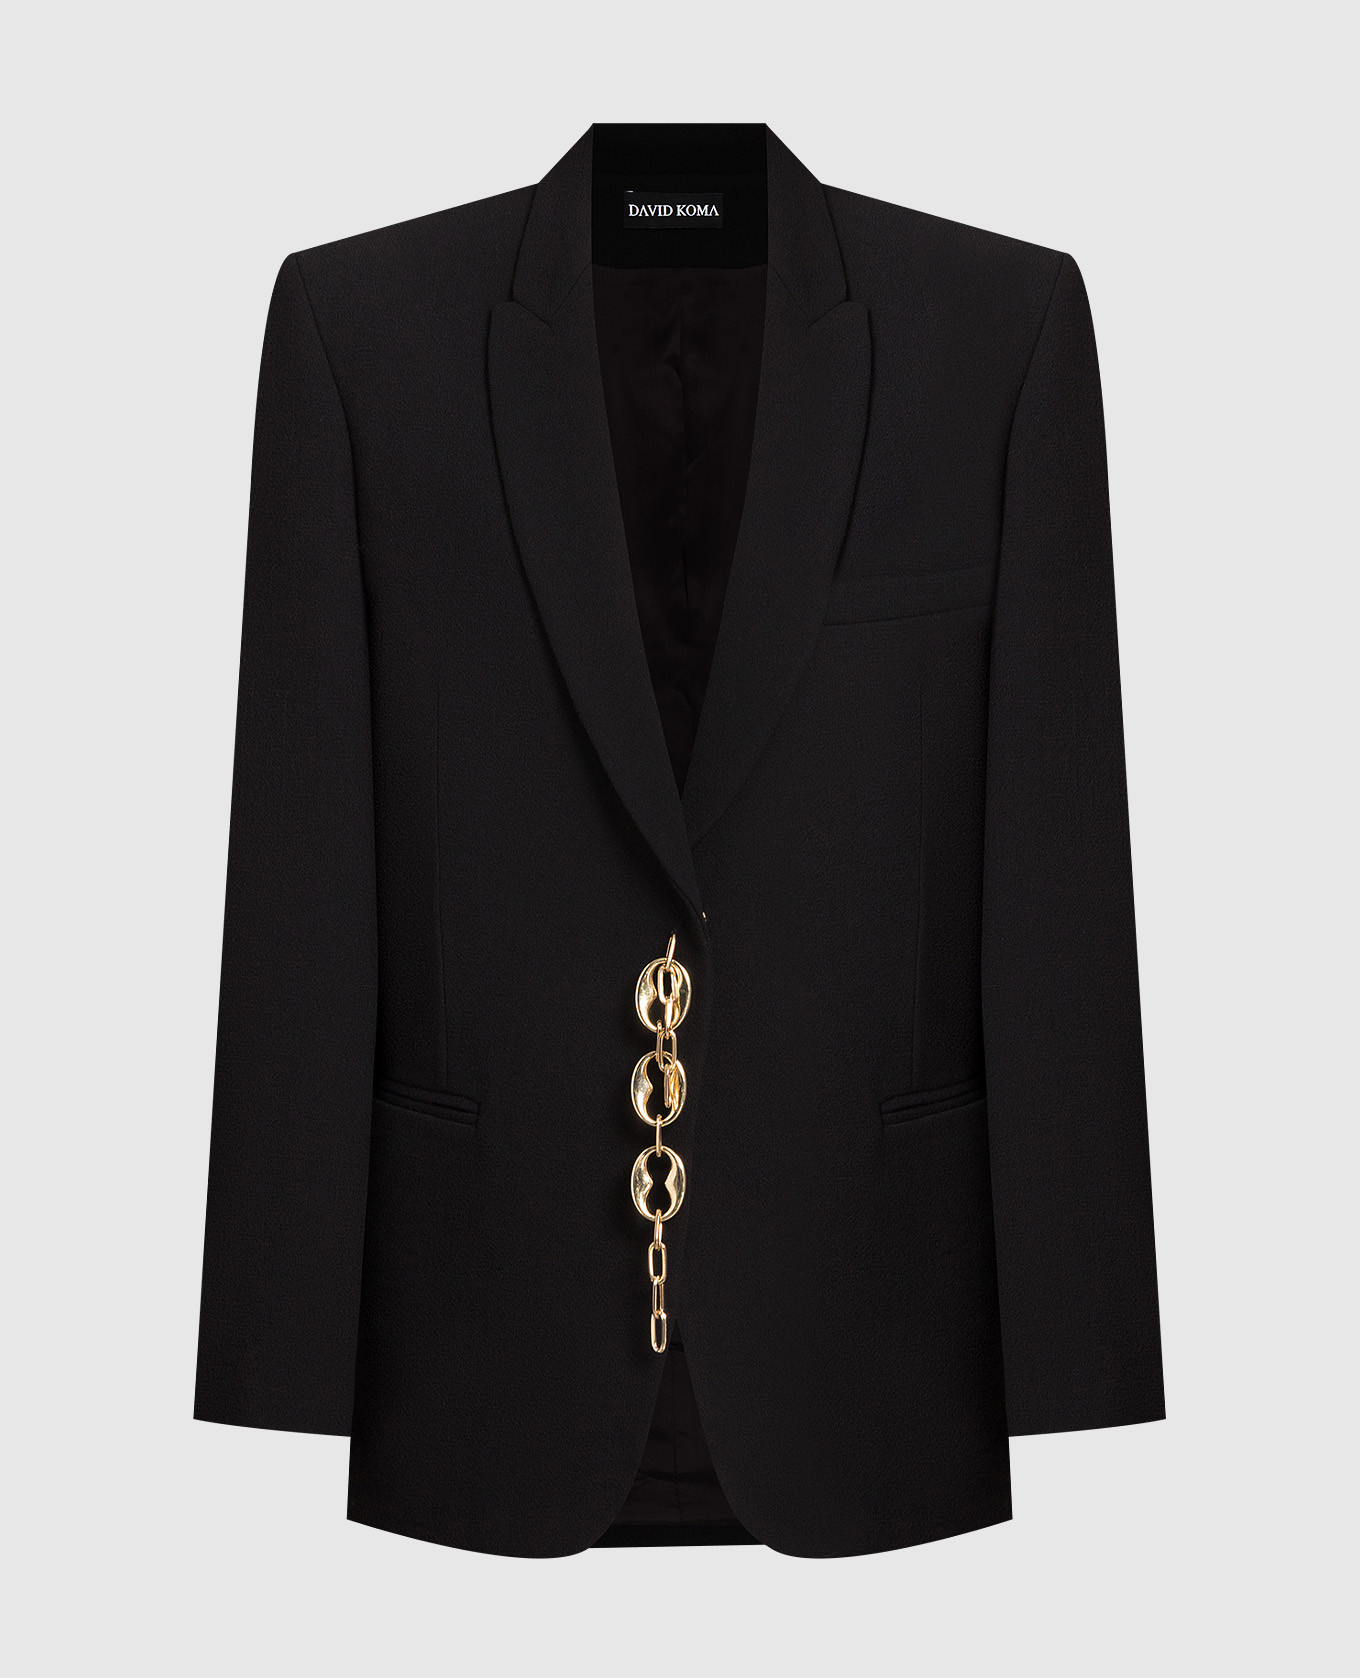 Black woolen jacket with a chain